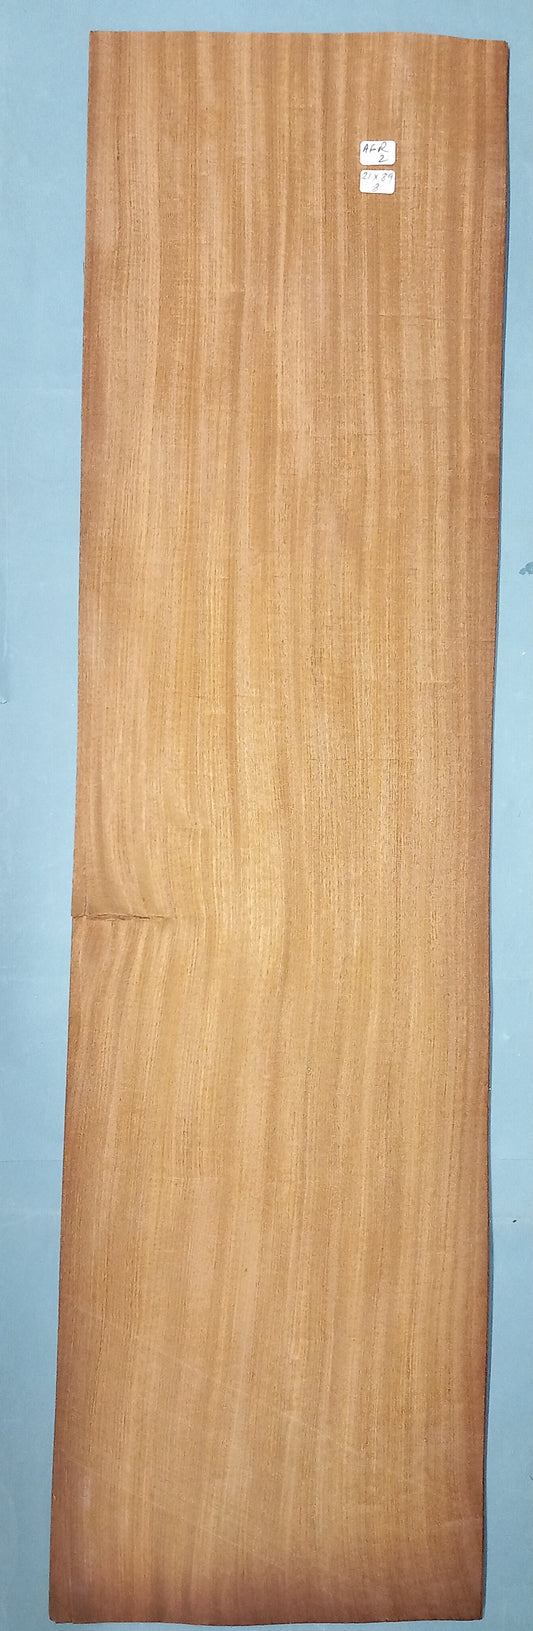 LARGE CONSECUTIVE SHEETS OF AFROMOSIA VENEER    21 X 89 CM